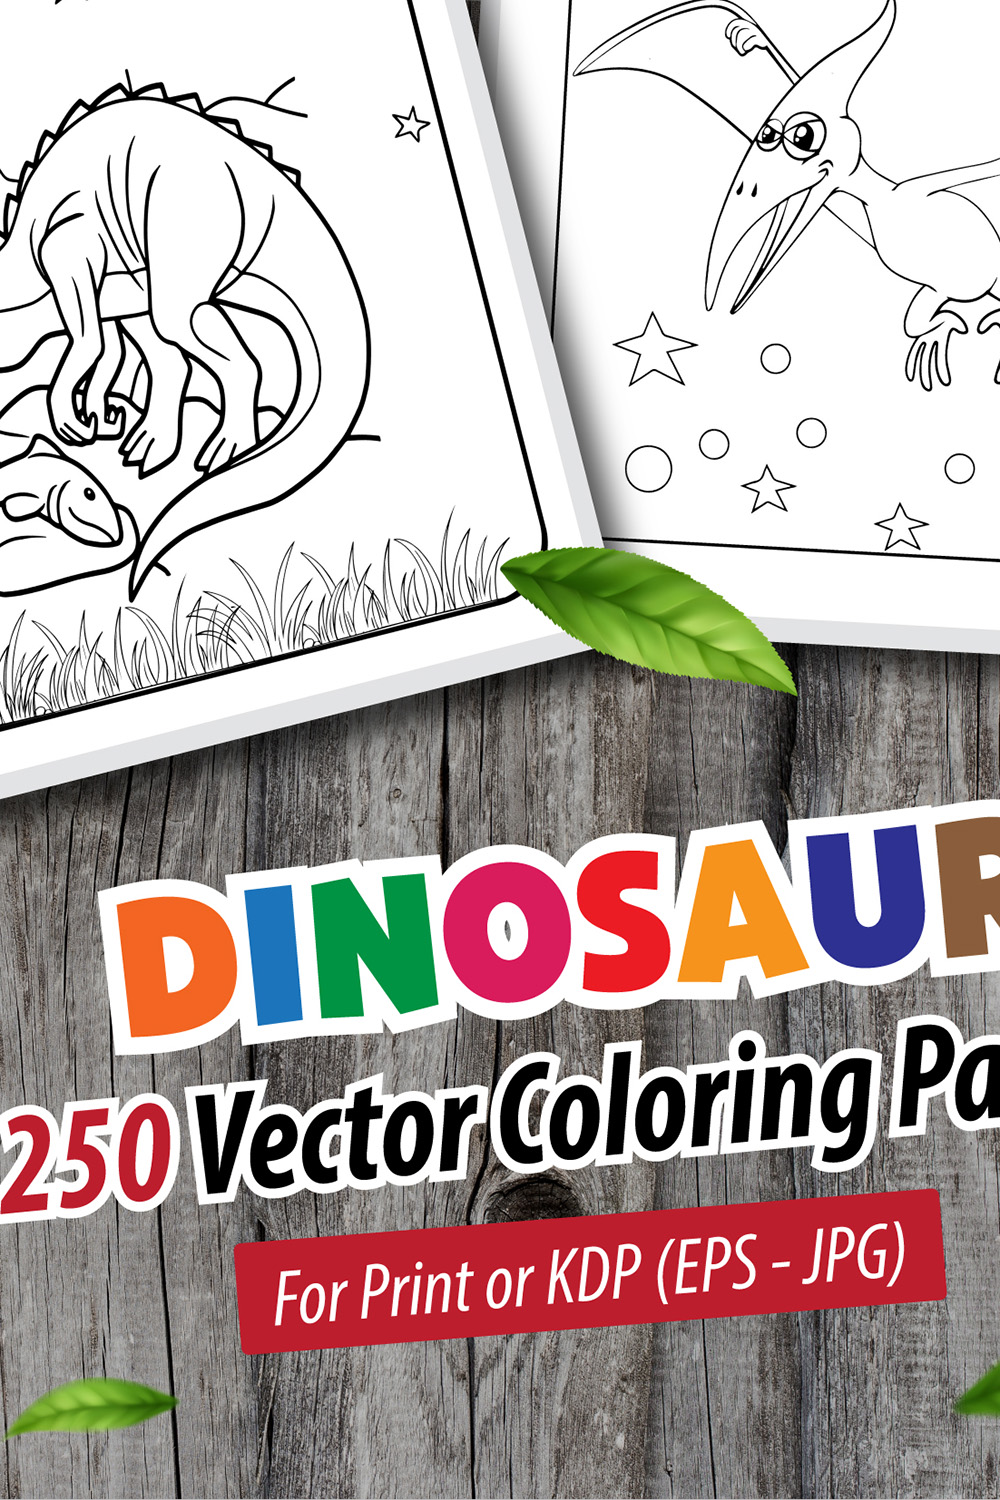 250 Vector Dinosaur Coloring Pages pinterest preview image.